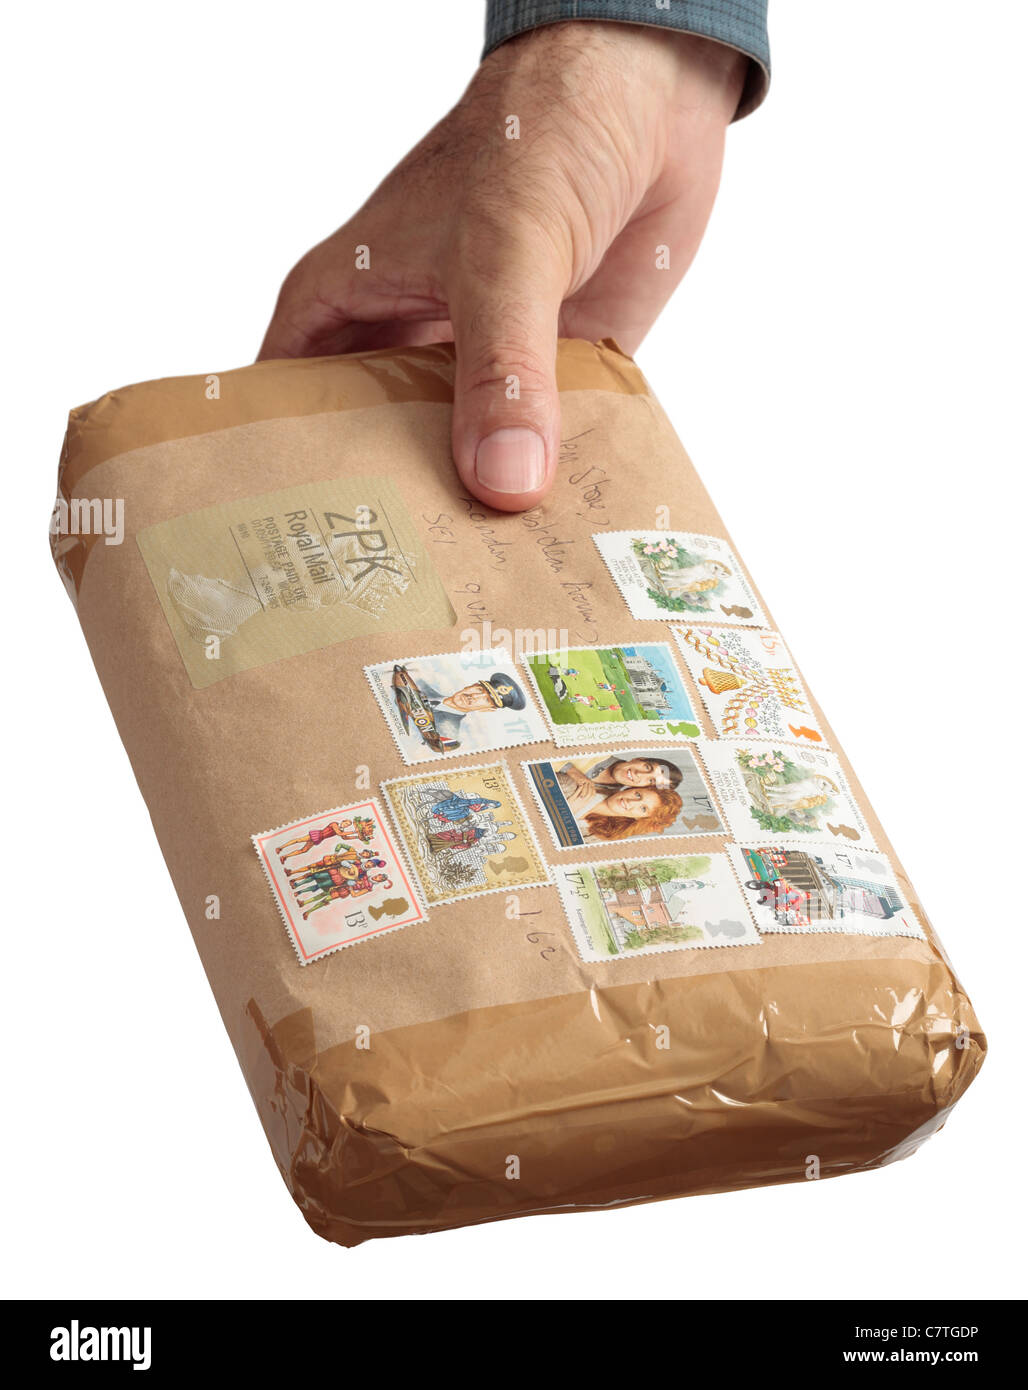 Parcel from Ebay seller with assorted postage stamps Stock Photo